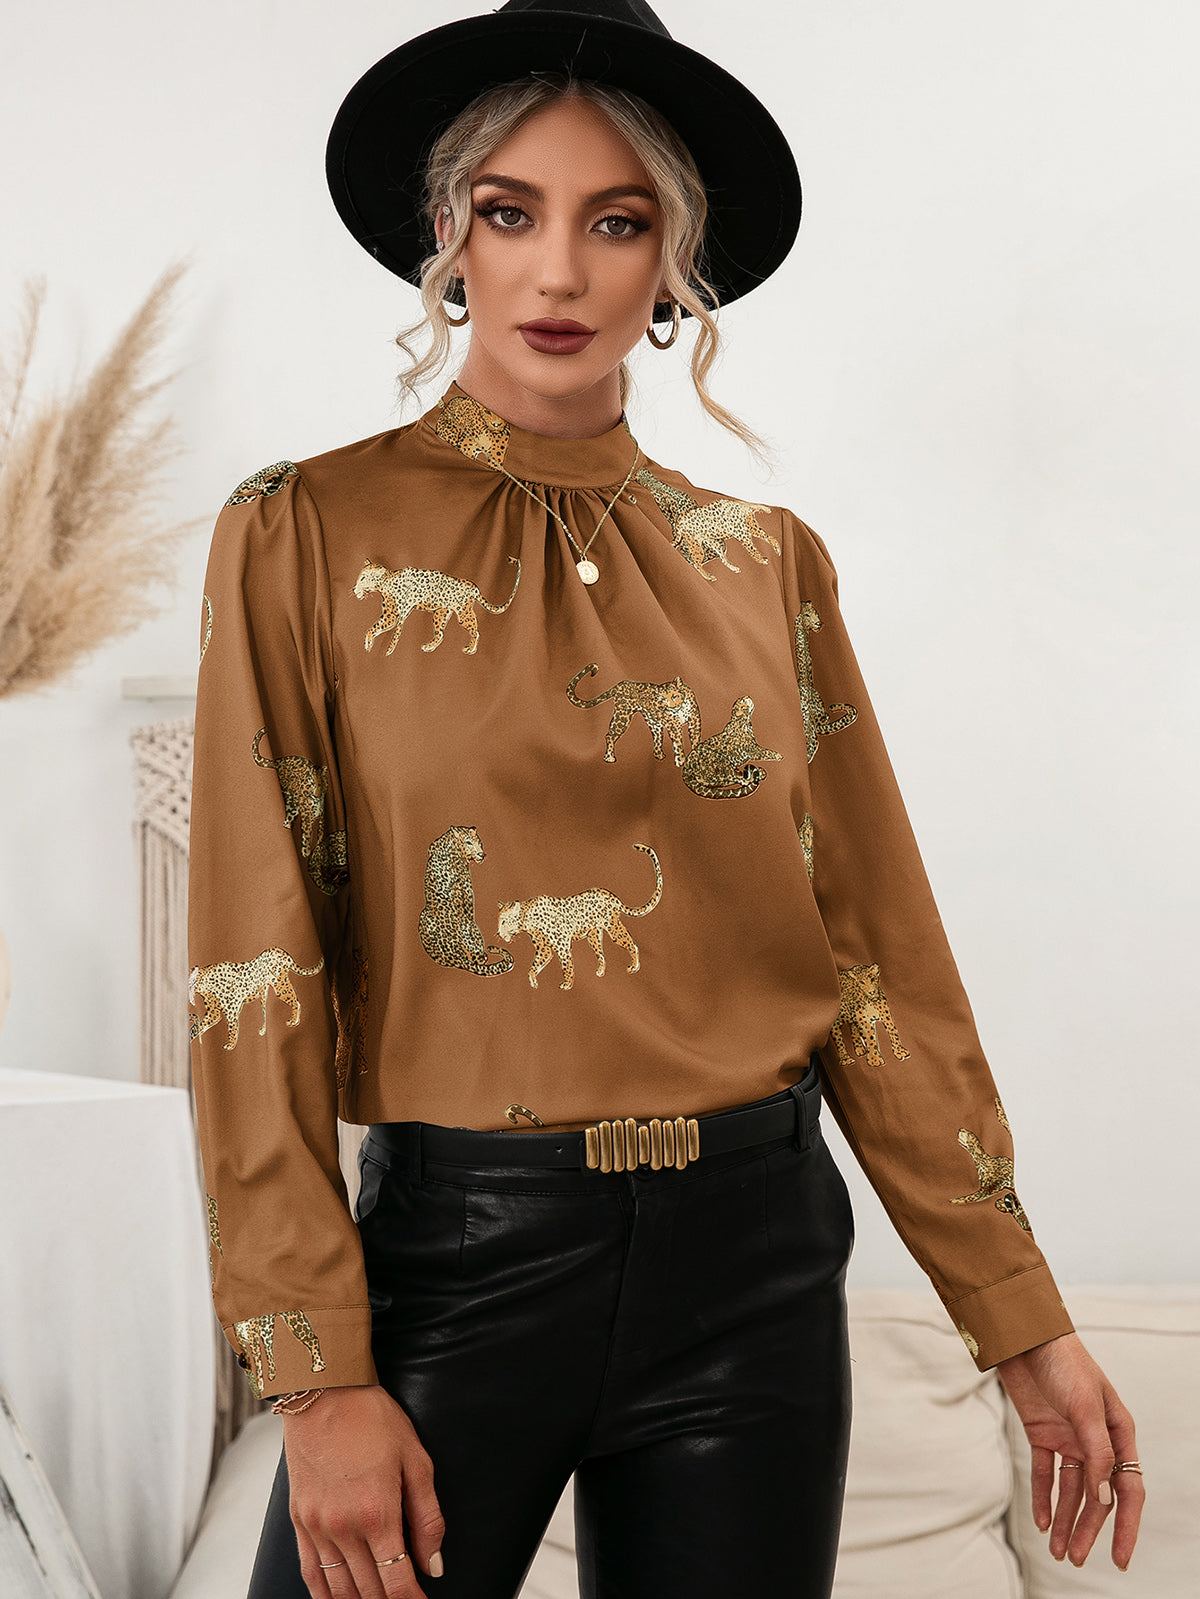 Call of the Wild Leopard Graphic Mock Neck Puff Sleeve Blouse